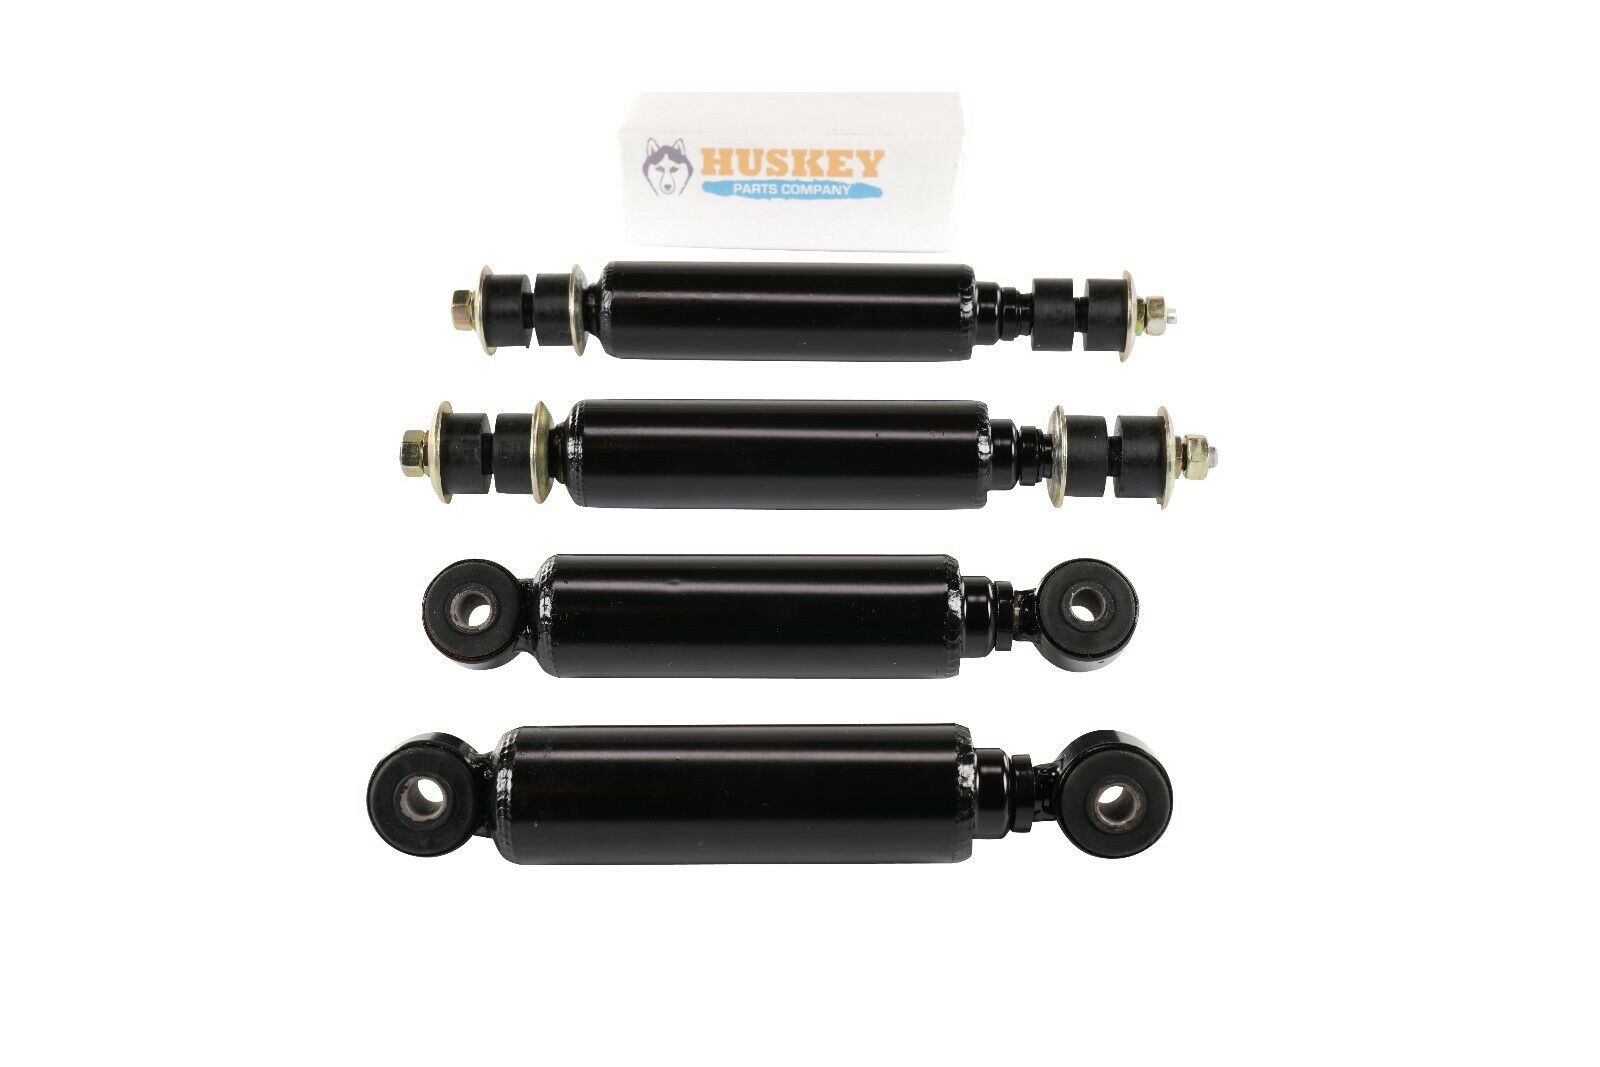 Club Car Shocks Precedent Front Rear Shock Absorbers Fit 2004-up G&e Golf Carts